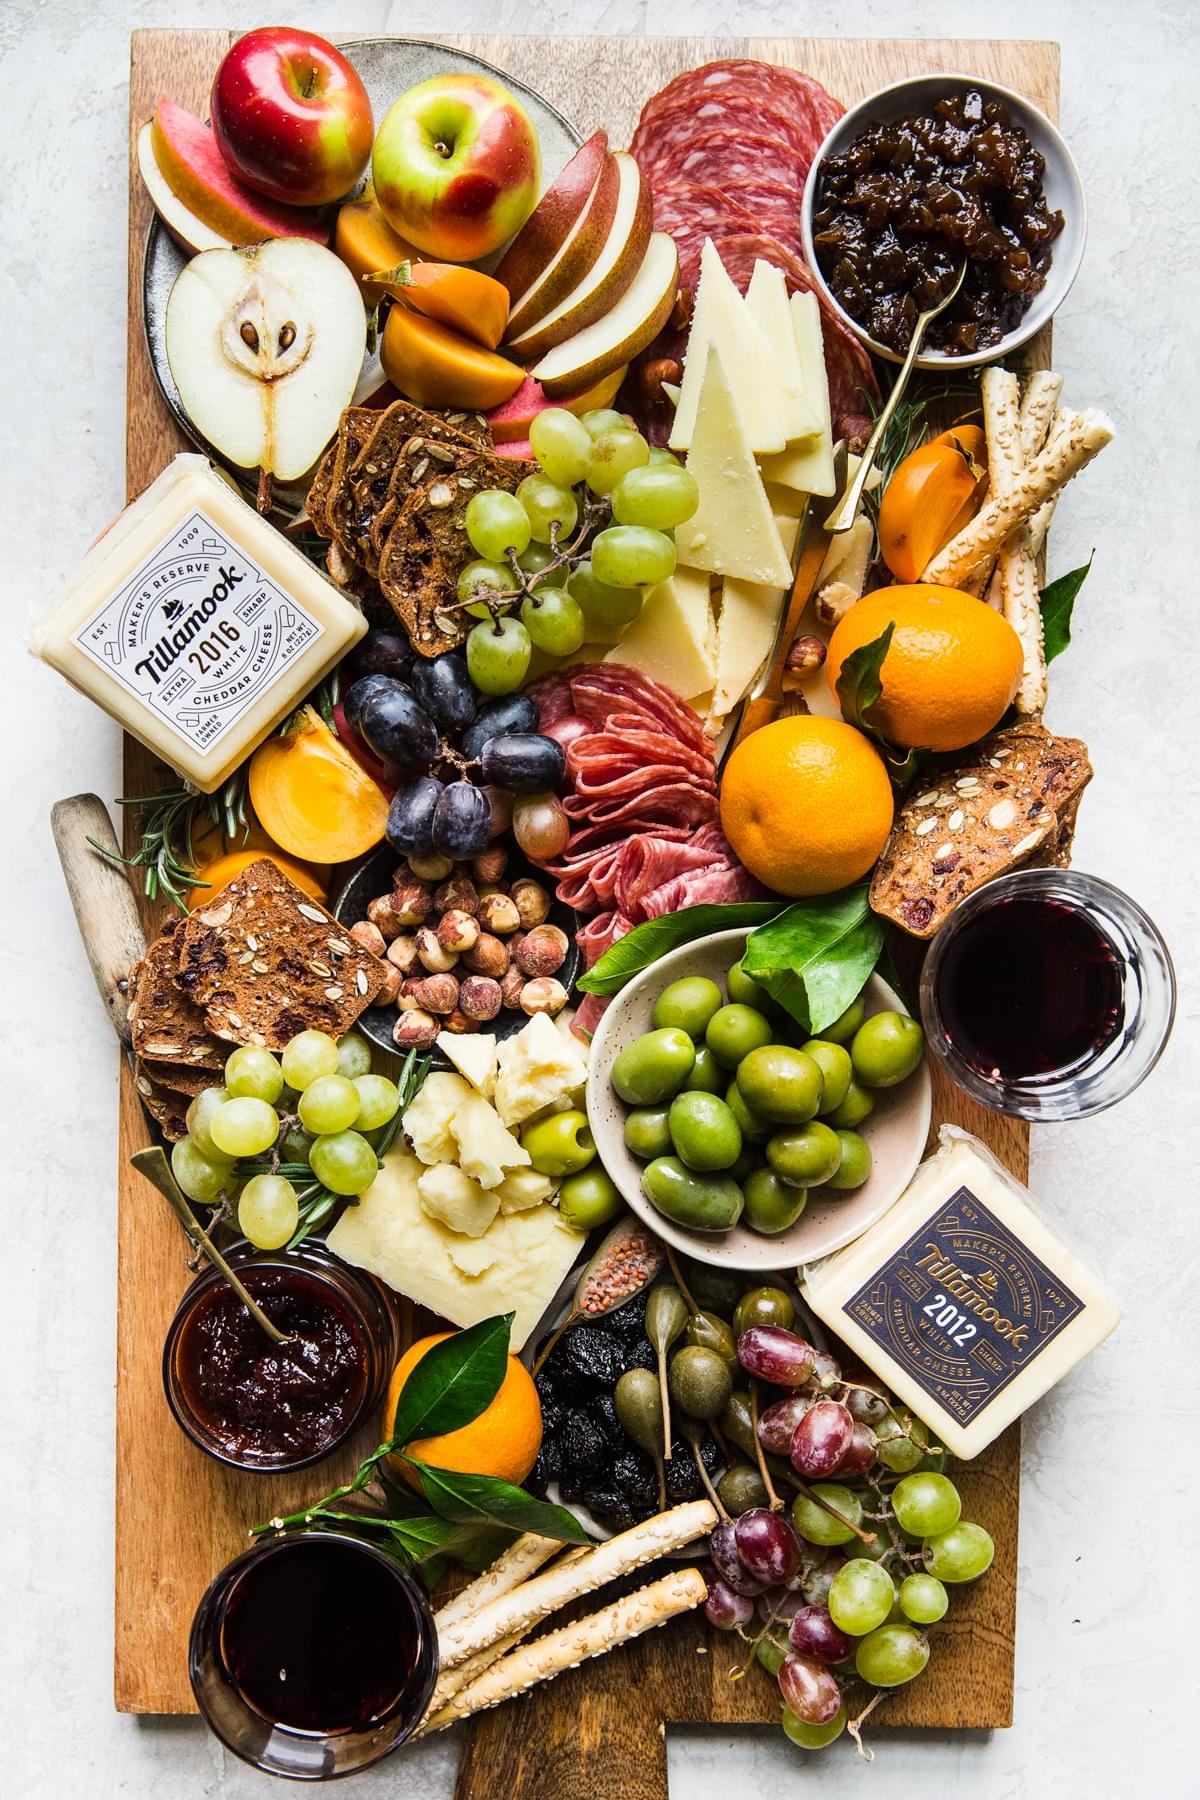 holiday cheese plate with Tillamook cheese, fruit, meats and spreads